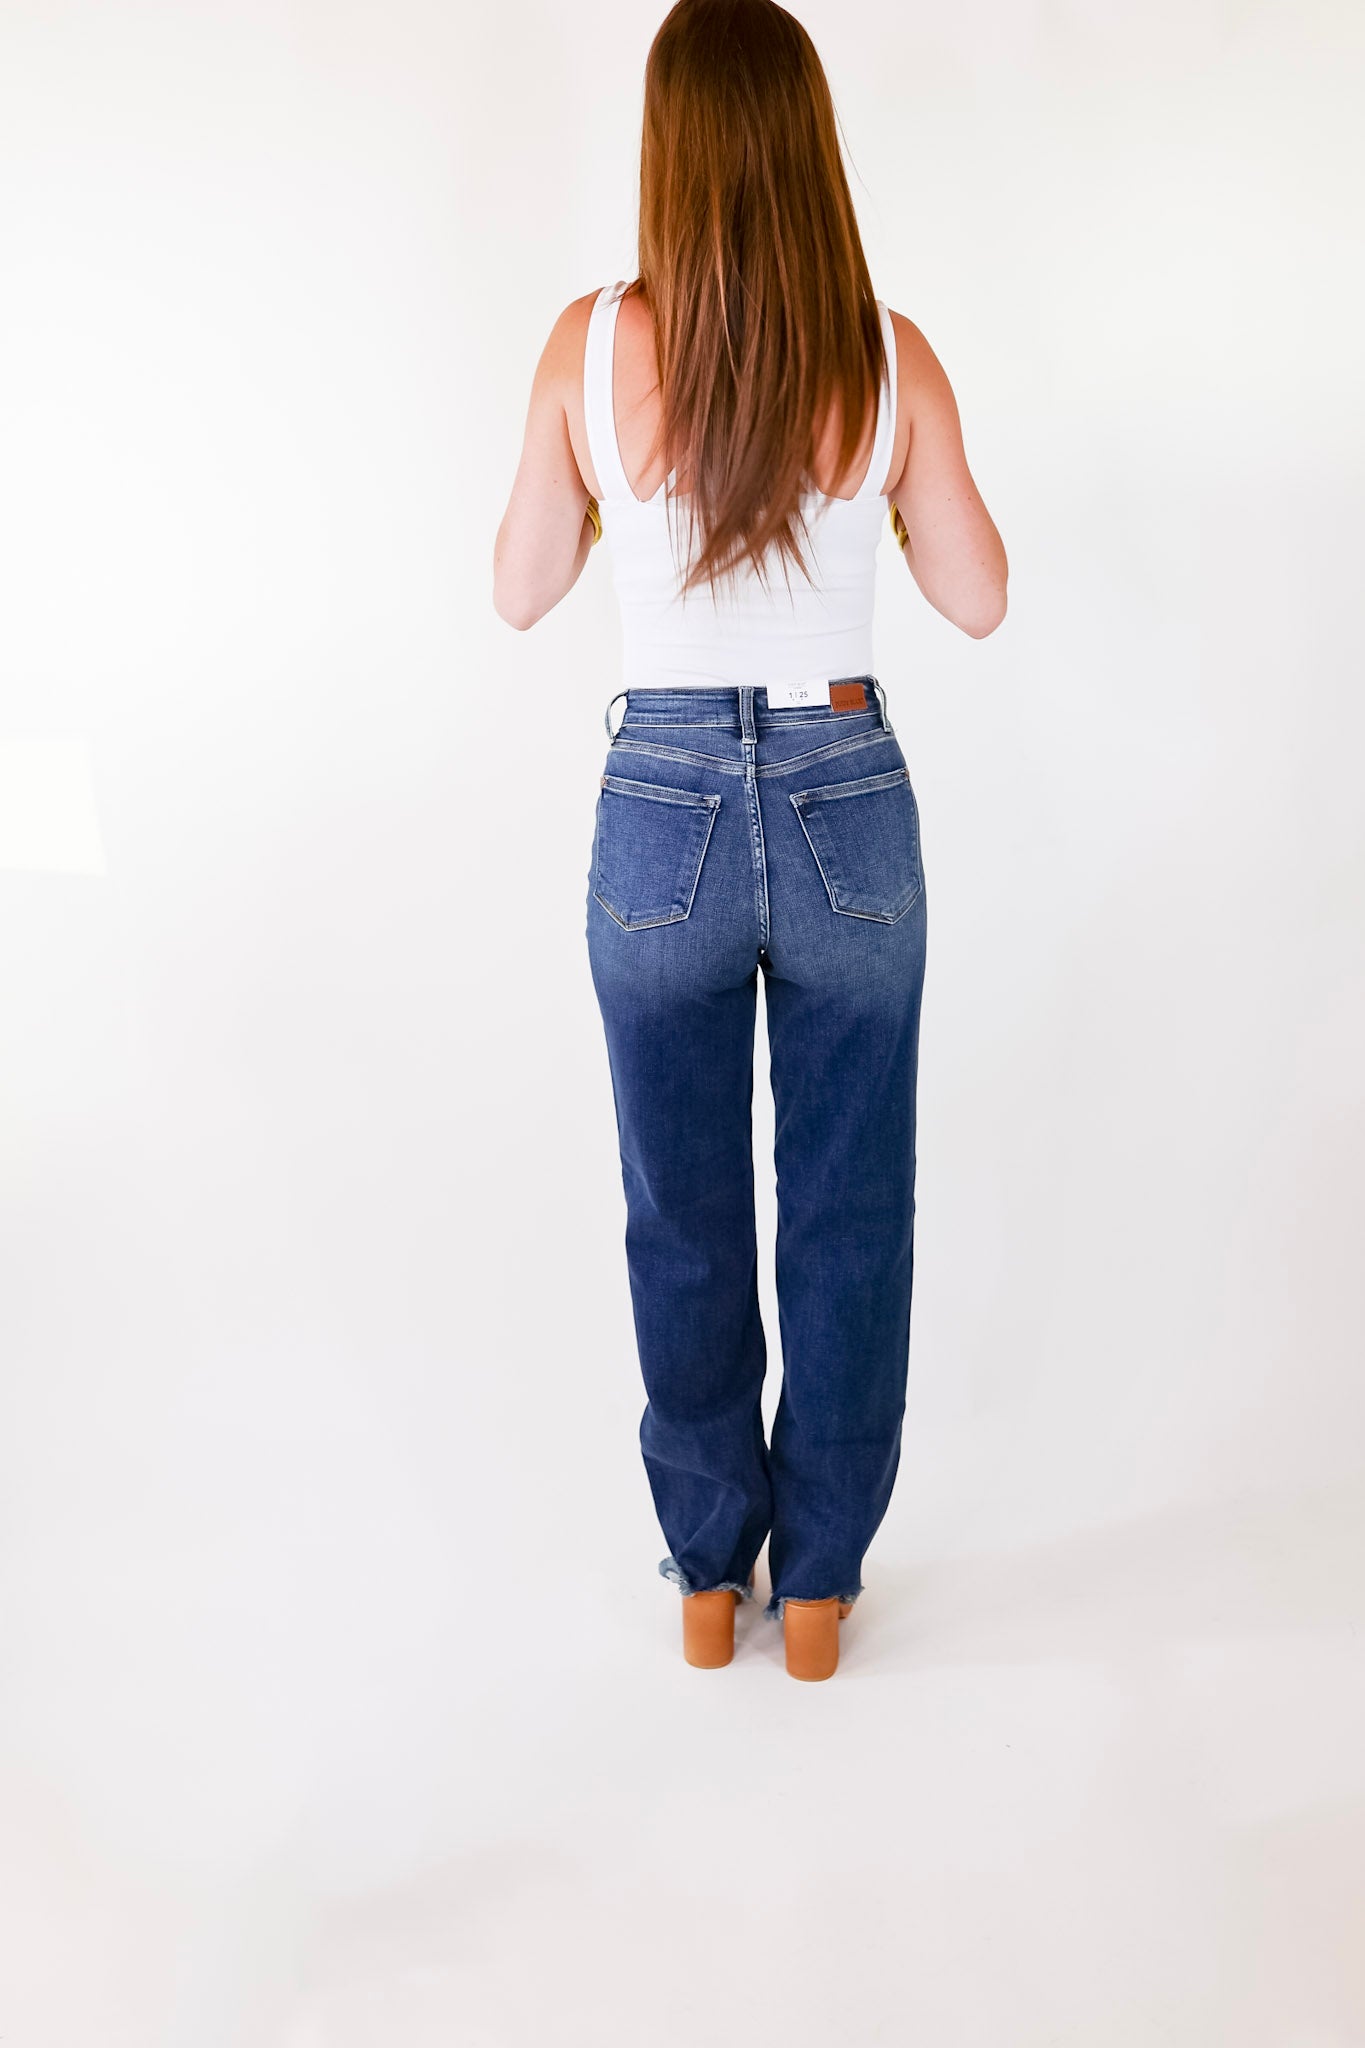 Judy Blue | Set The Spark Button Fly Wide Leg Jeans in Dark Wash - Giddy Up Glamour Boutique